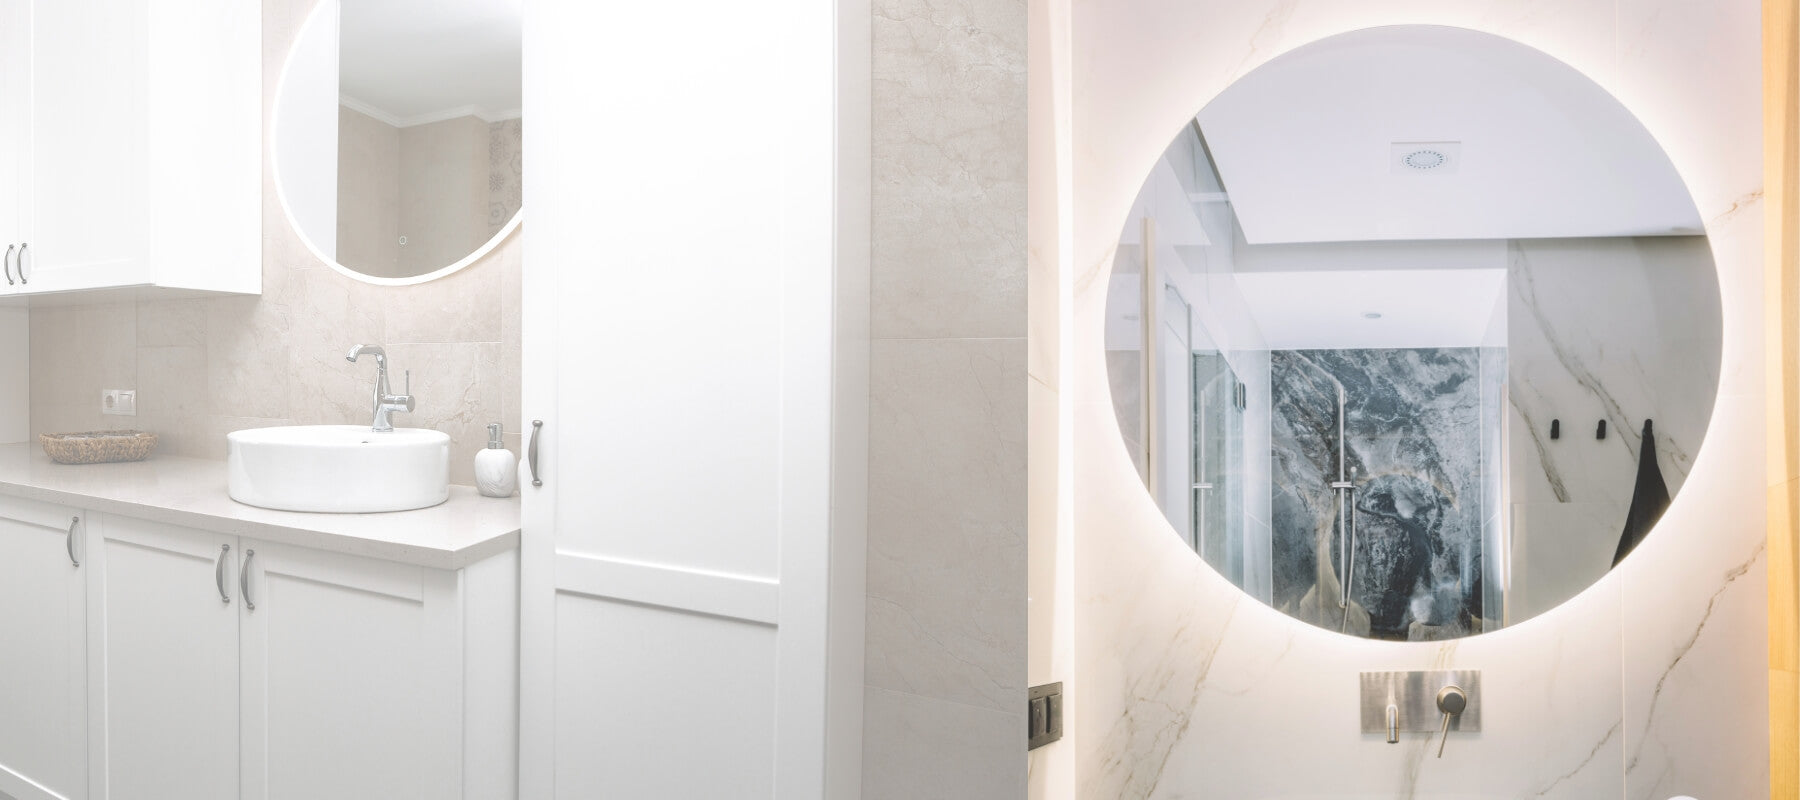 Upgrade your space with an elegant LED mirror - perfect for any modern interior